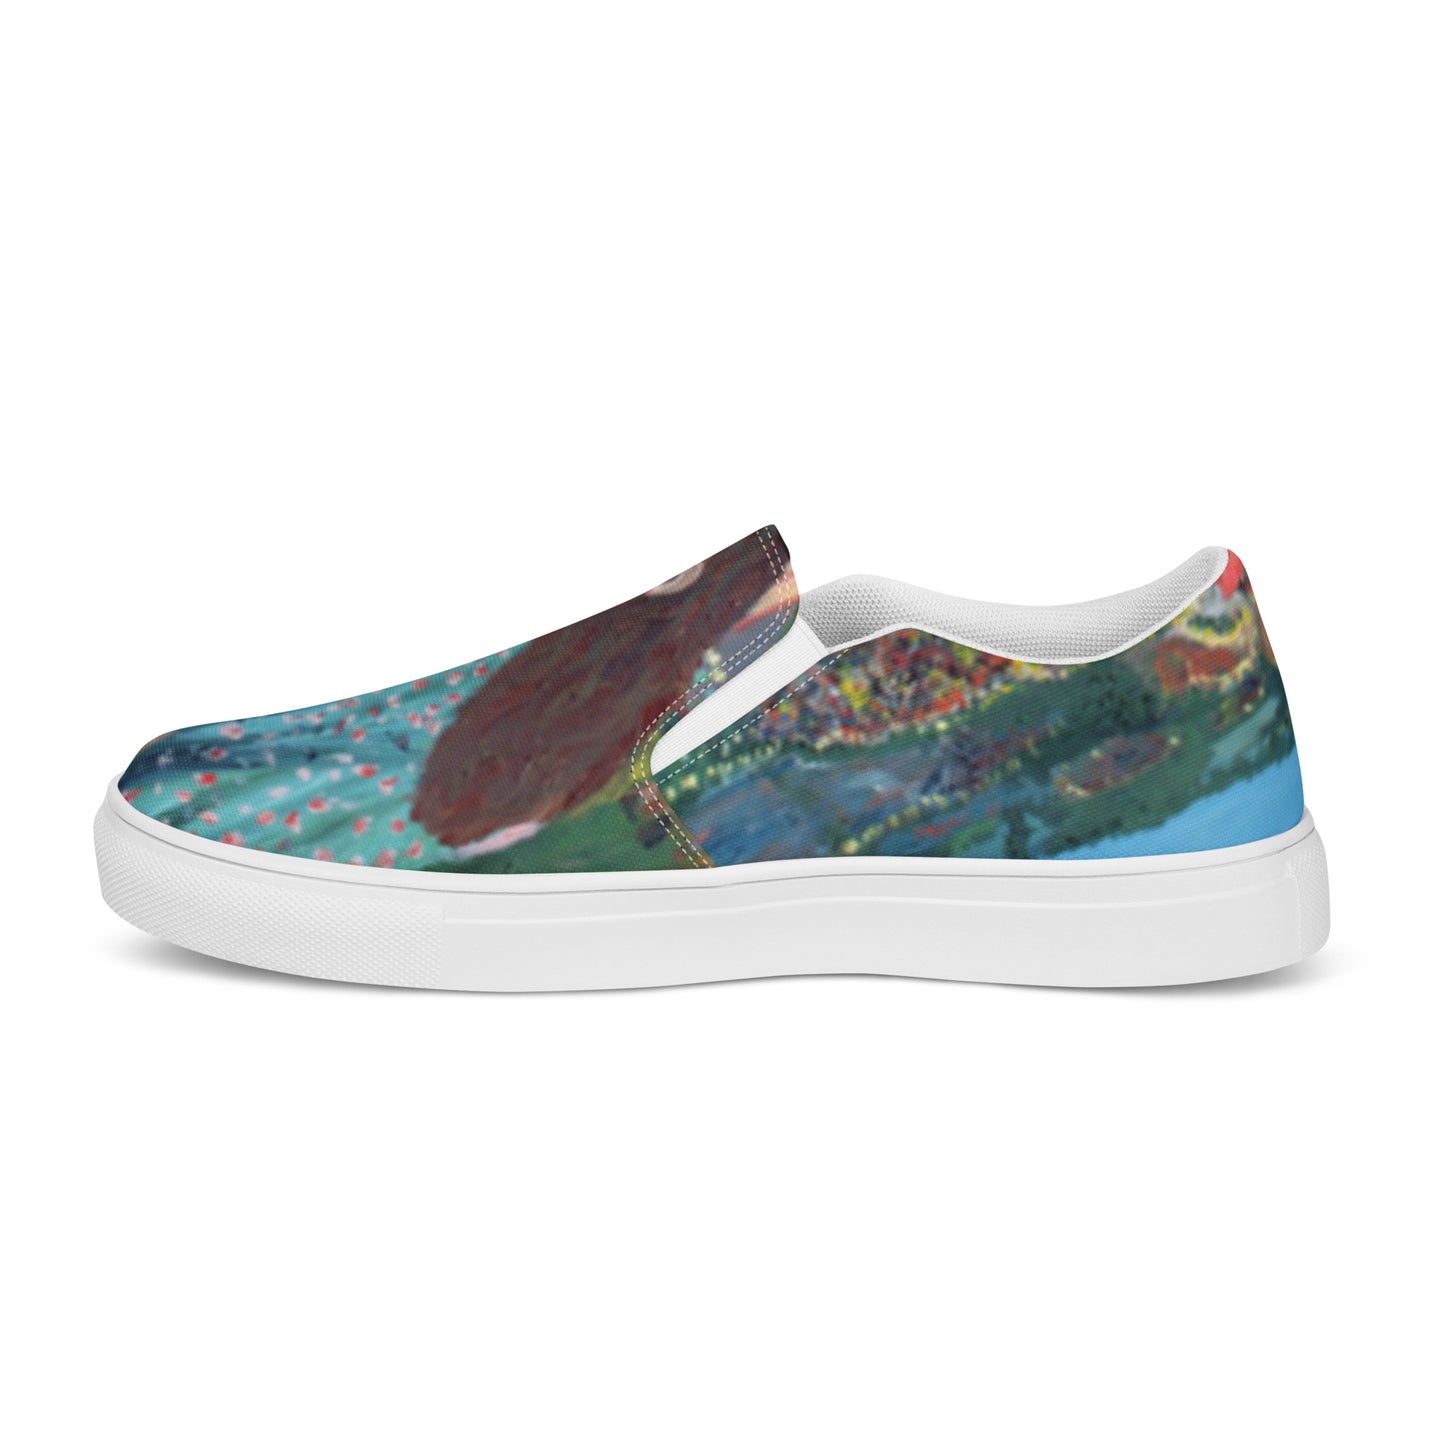 Sunset Hill - Women’s slip-on canvas shoes